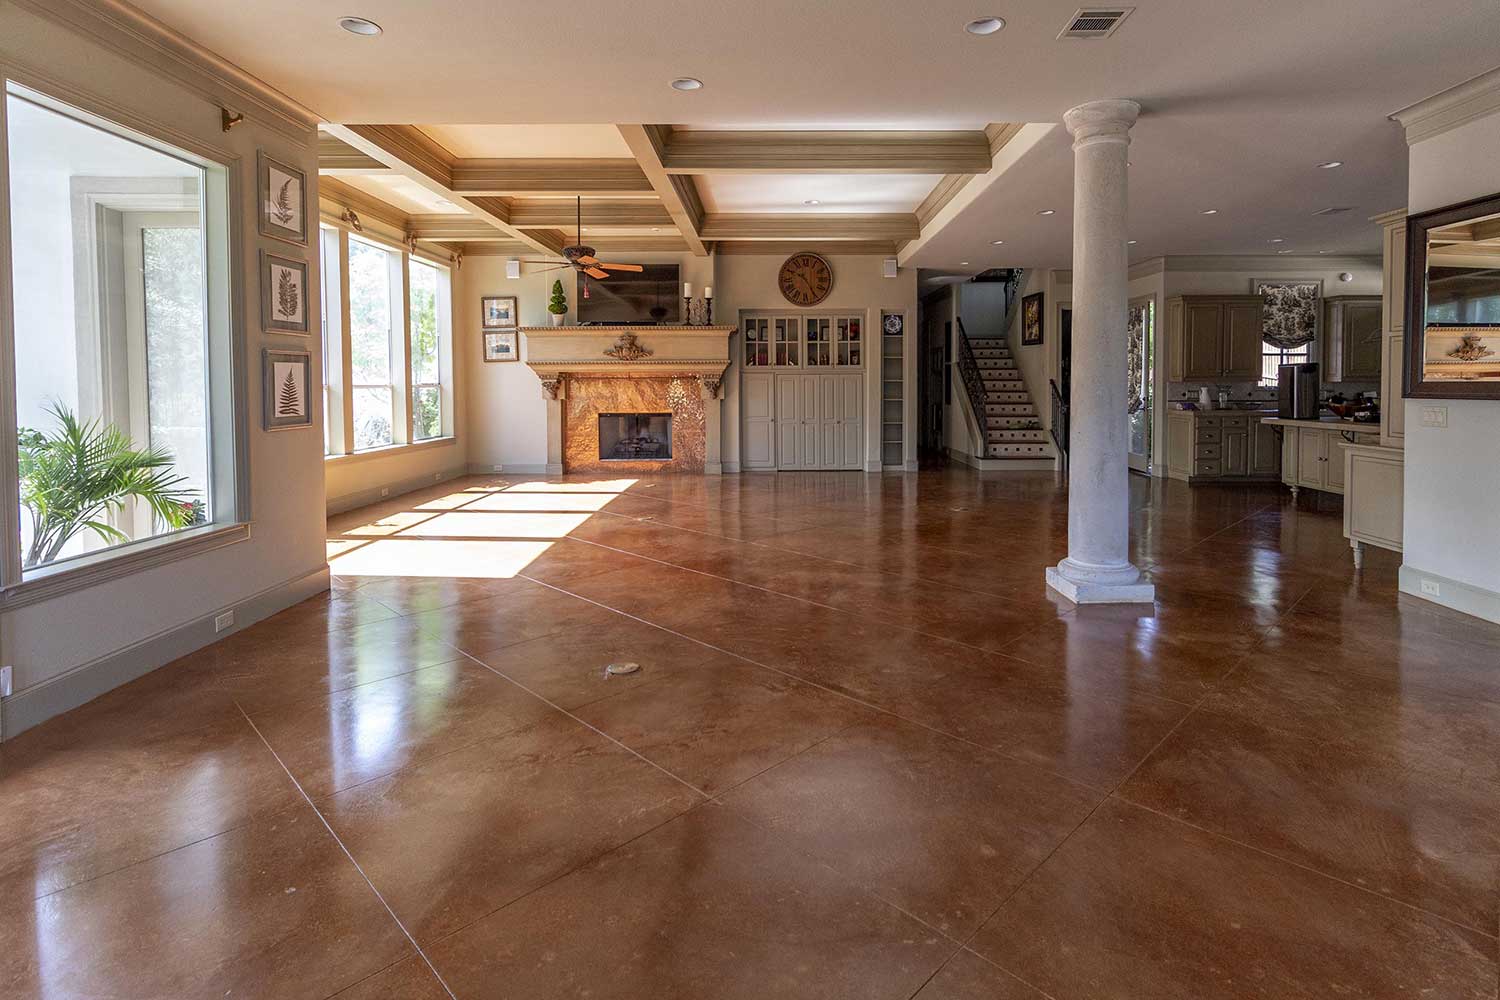 How To Stain A Concrete Floor | Storables